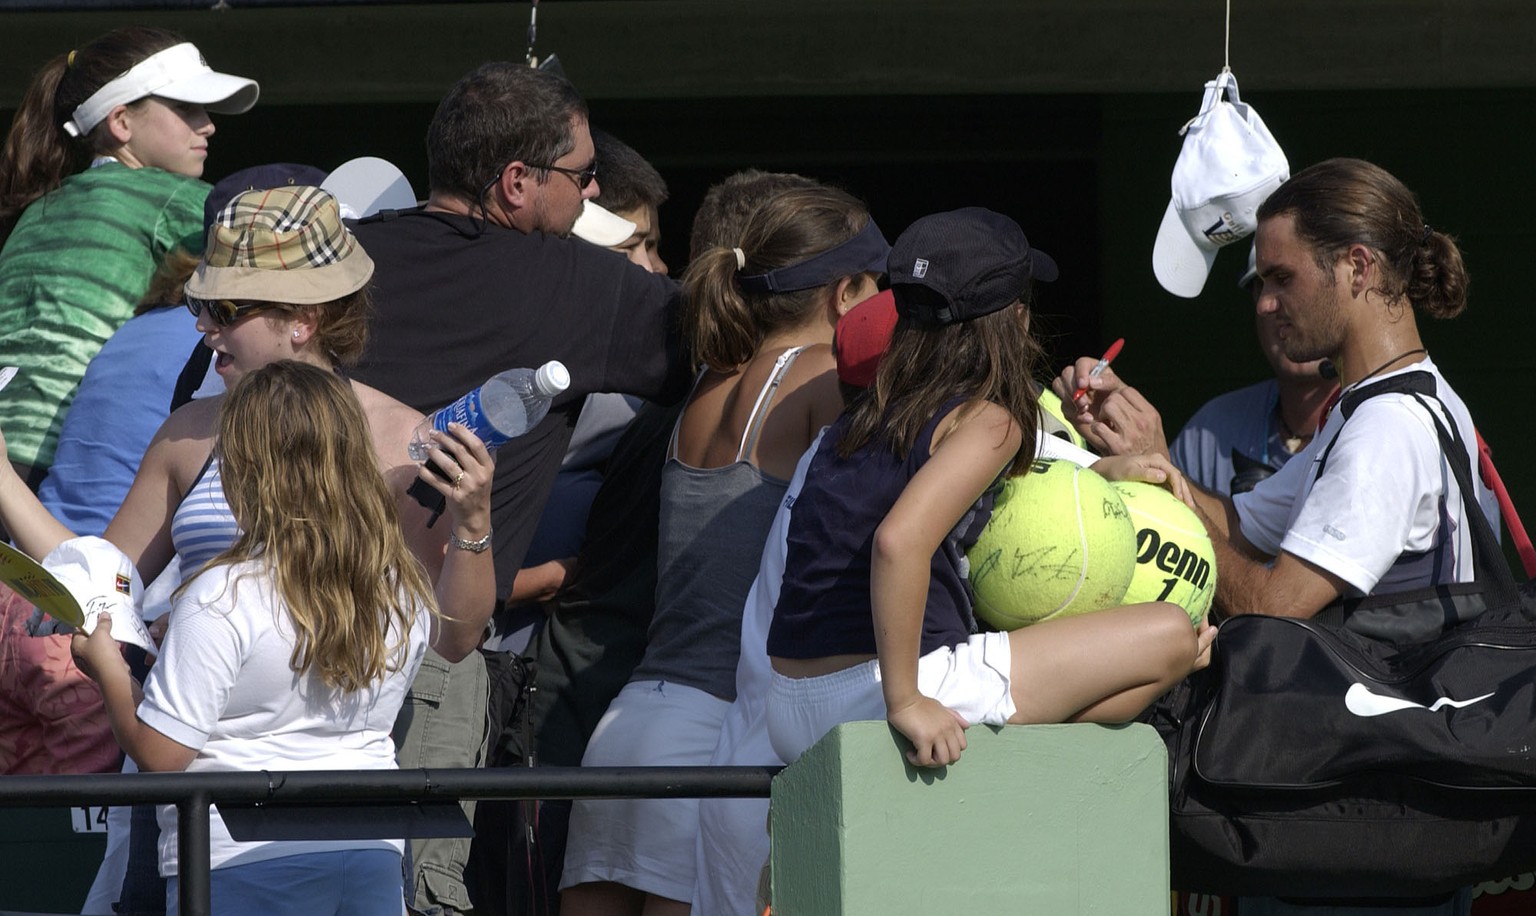 28 Mar 2002: Roger Federer of Switzerland signs autographs after defeating Andrei Pavel of Romania during the Nasdaq-100 Open at The Tennis Center at Crandon Park in Miami, Florida. DIGITAL IMAGE Mand ...